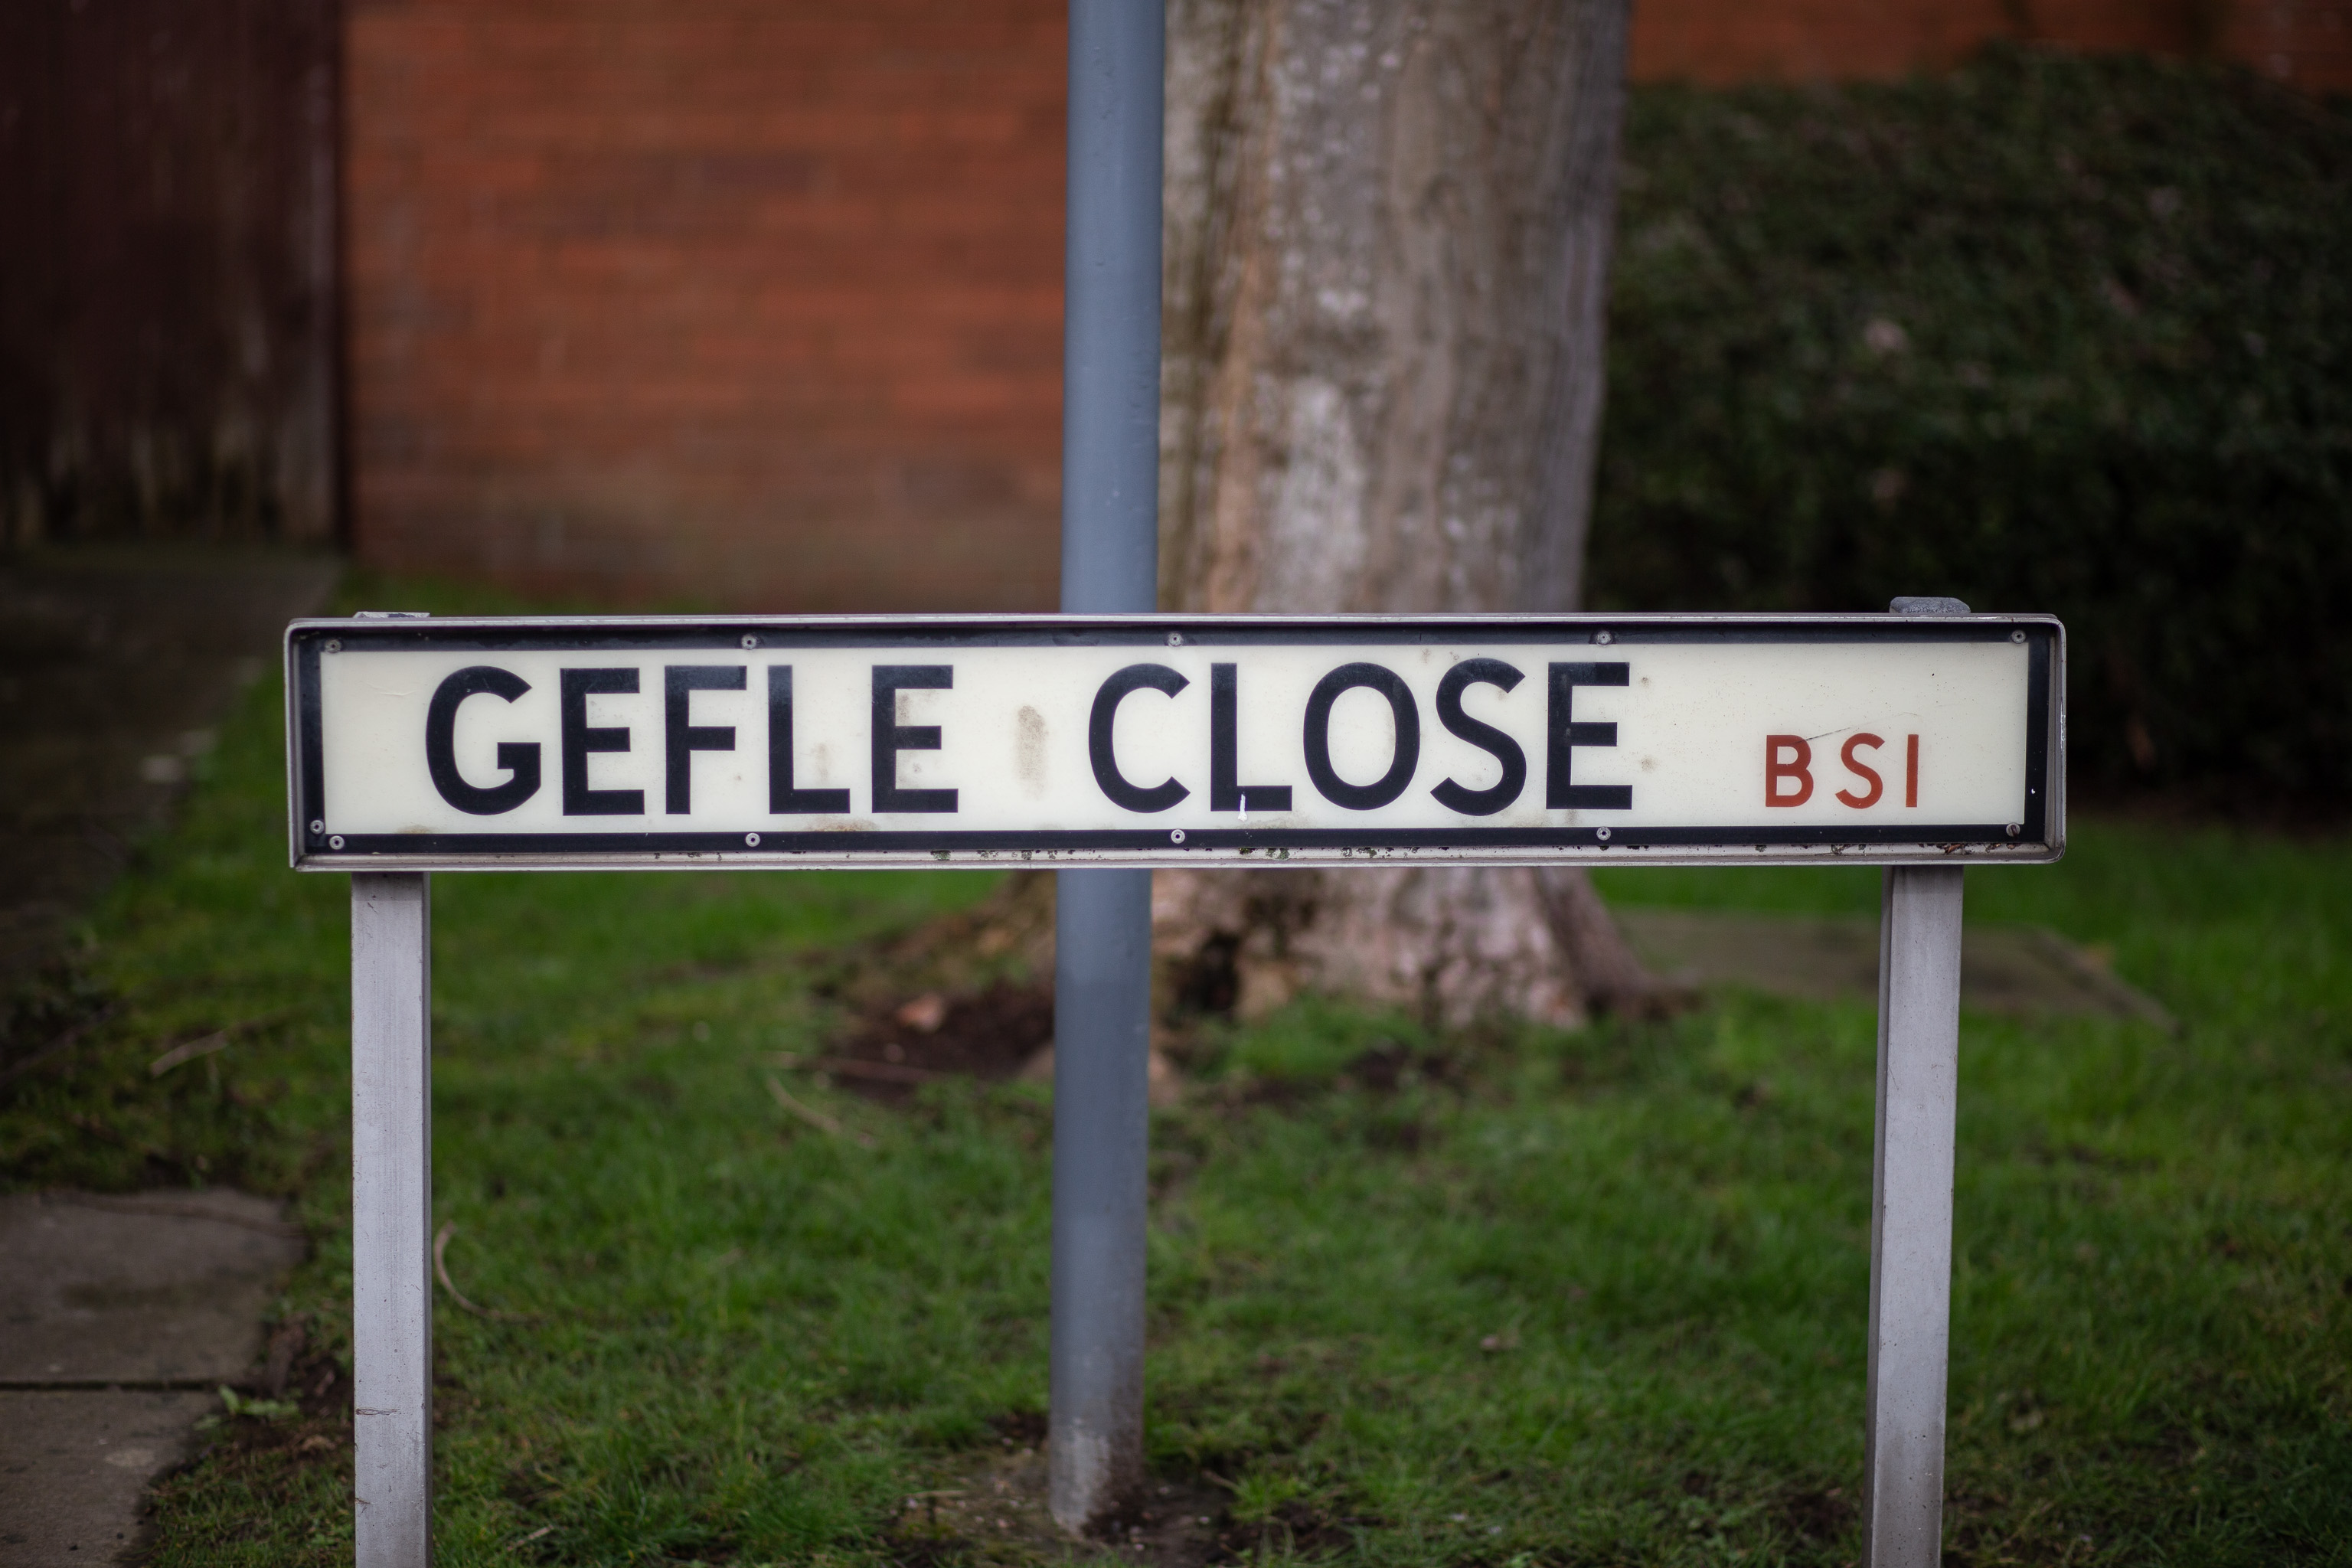 GEFLE CLOSE
It always reminds me of the GELFs from Red Dwarf.
